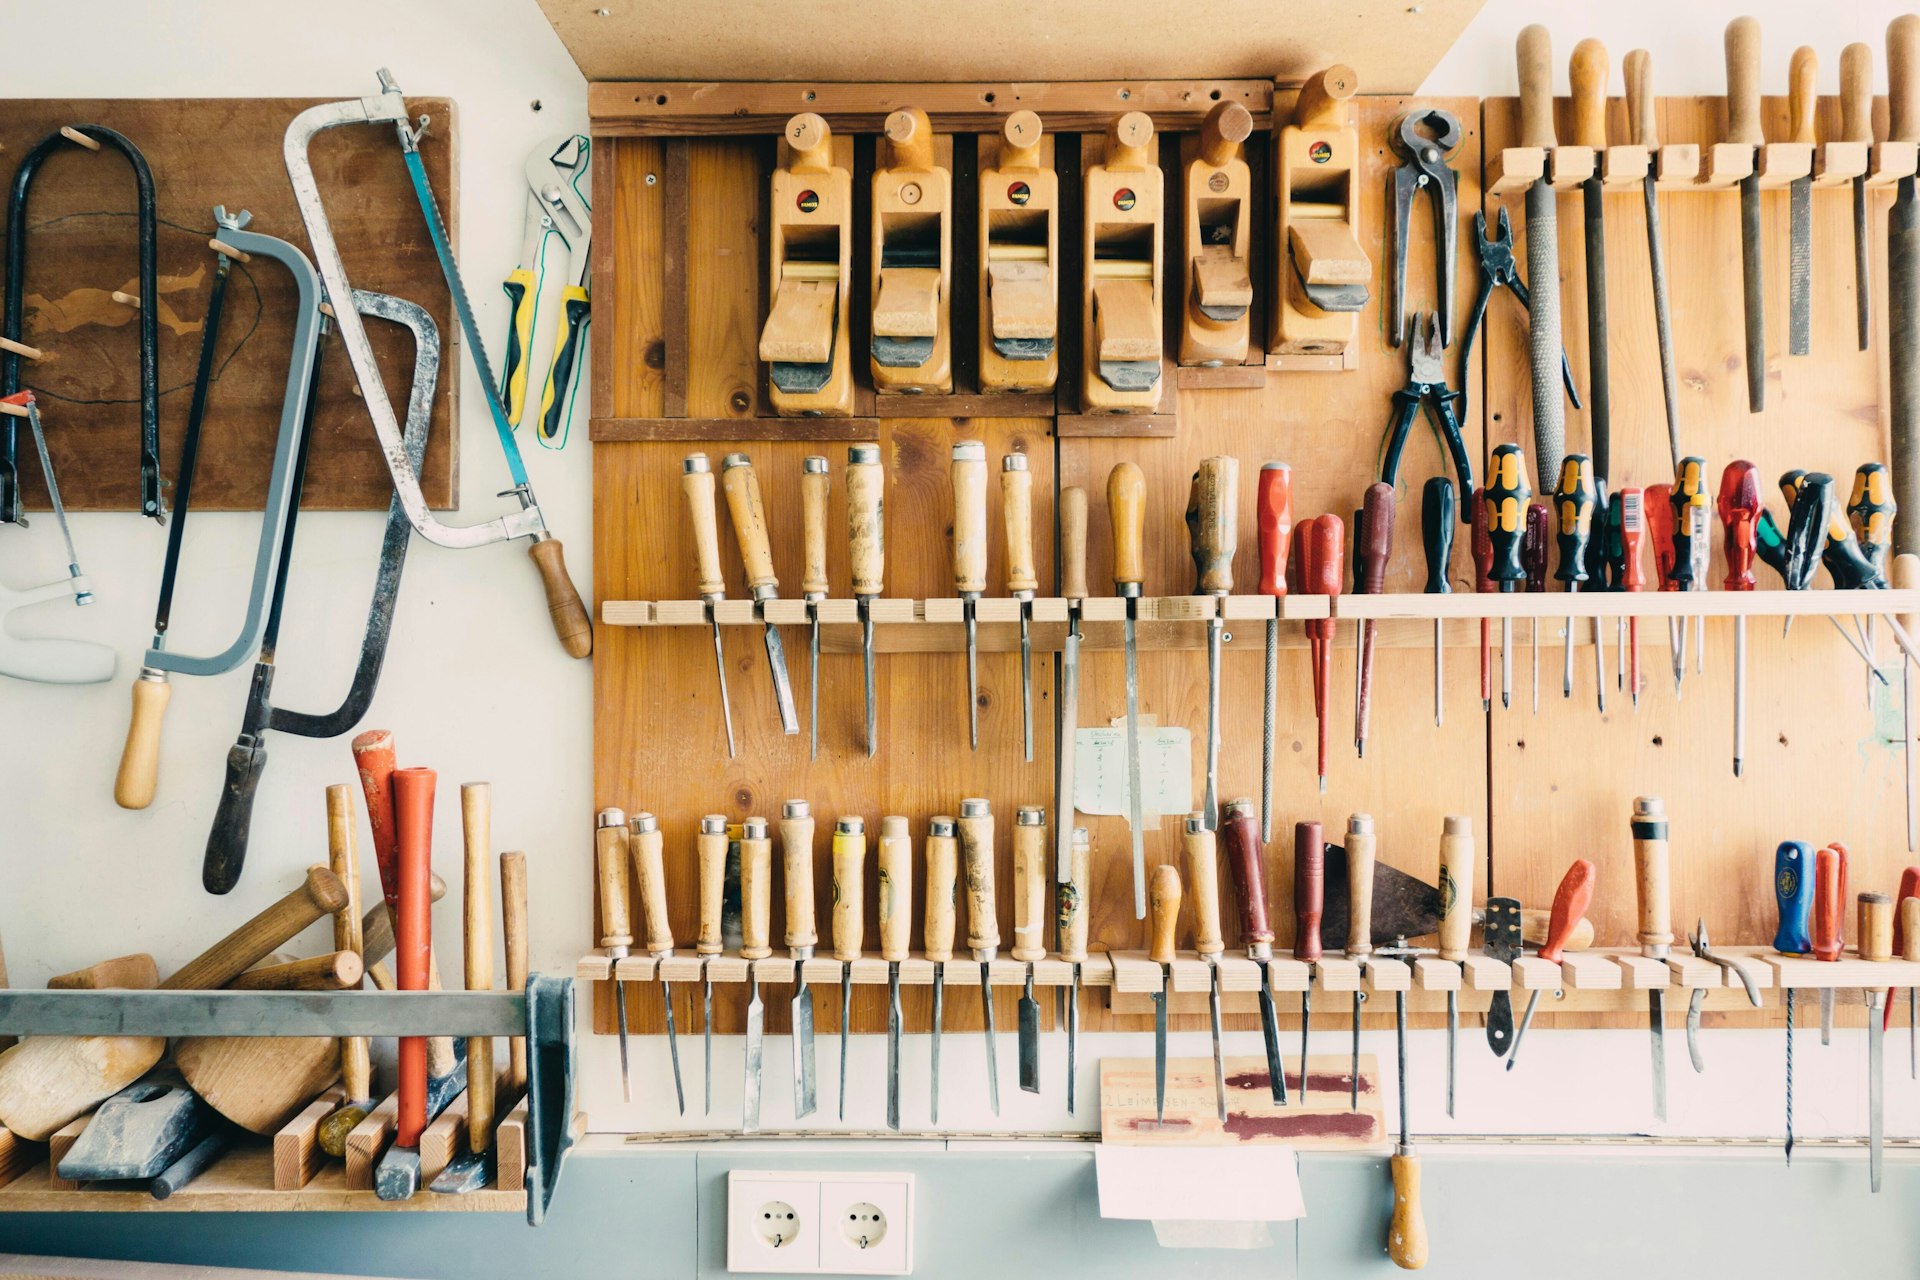 A couple rows of DIY tools hanging up on a wooden wall